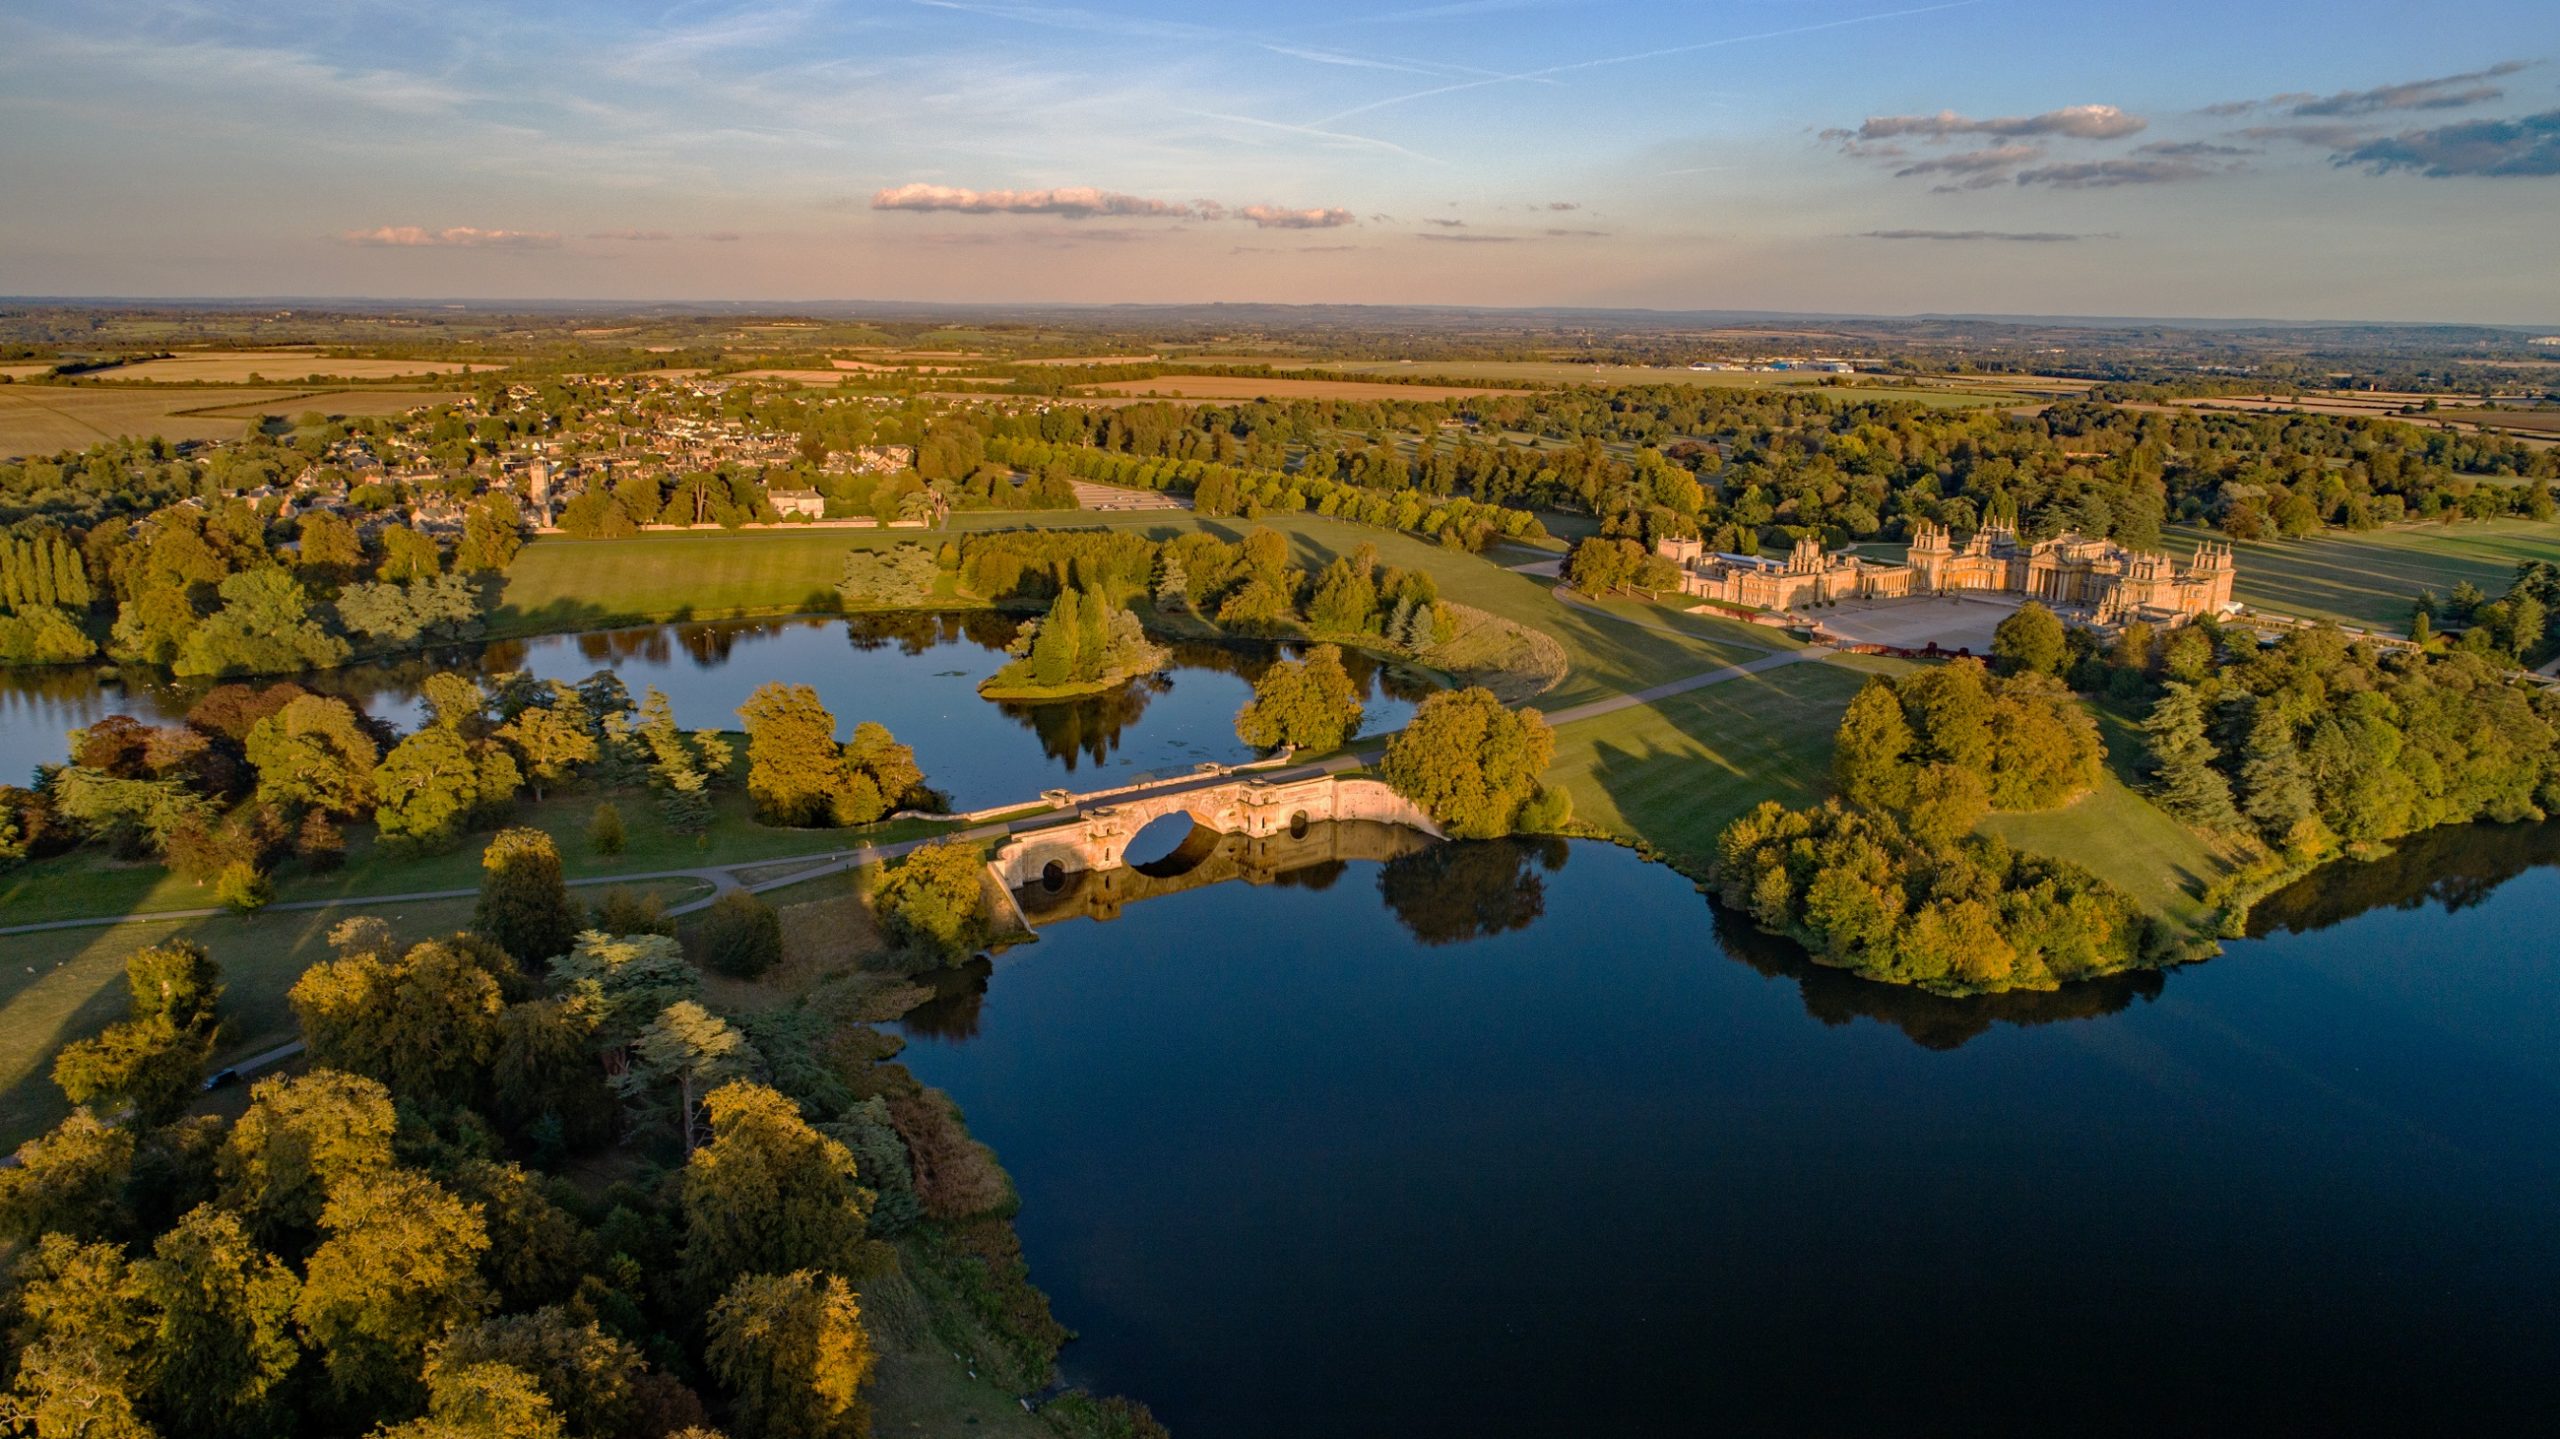 Aerial photo of Woodstock and Blenheim Palace